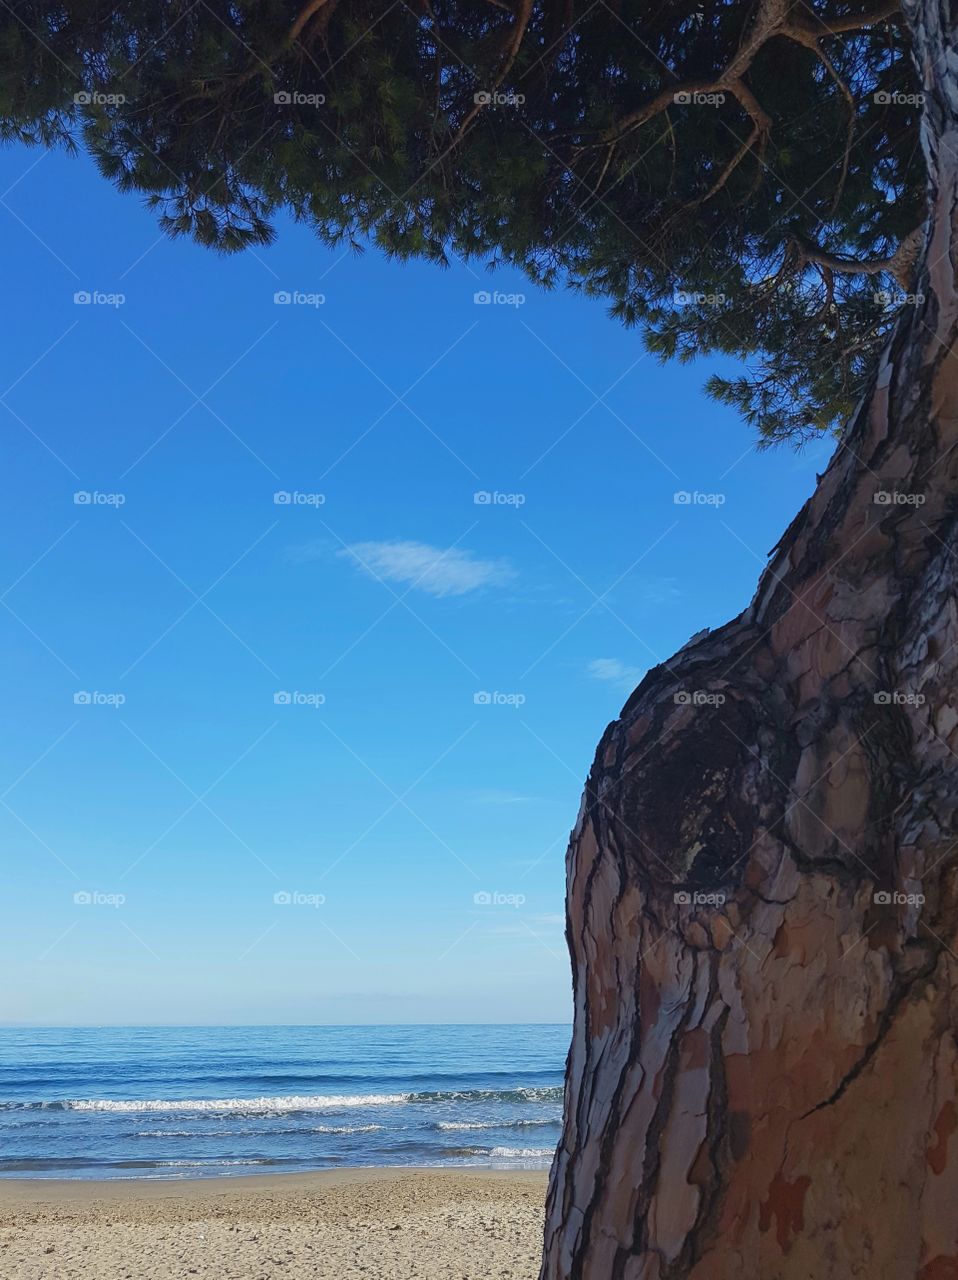 Sea view from under a tree in a sunny day with blue sky